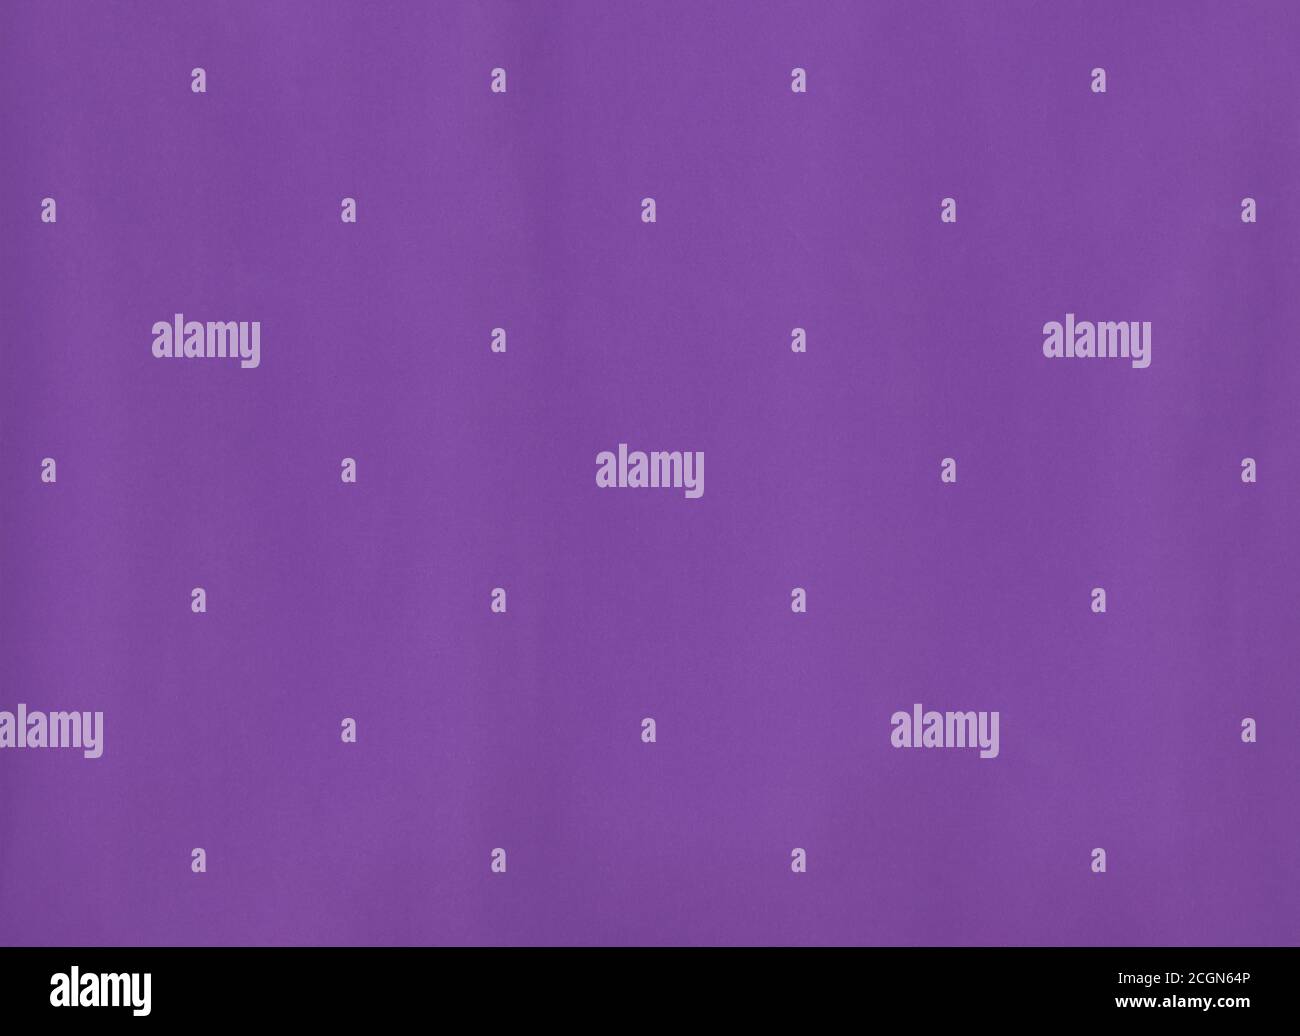 Uneven or creased purple art paper for background design. Stock Photo